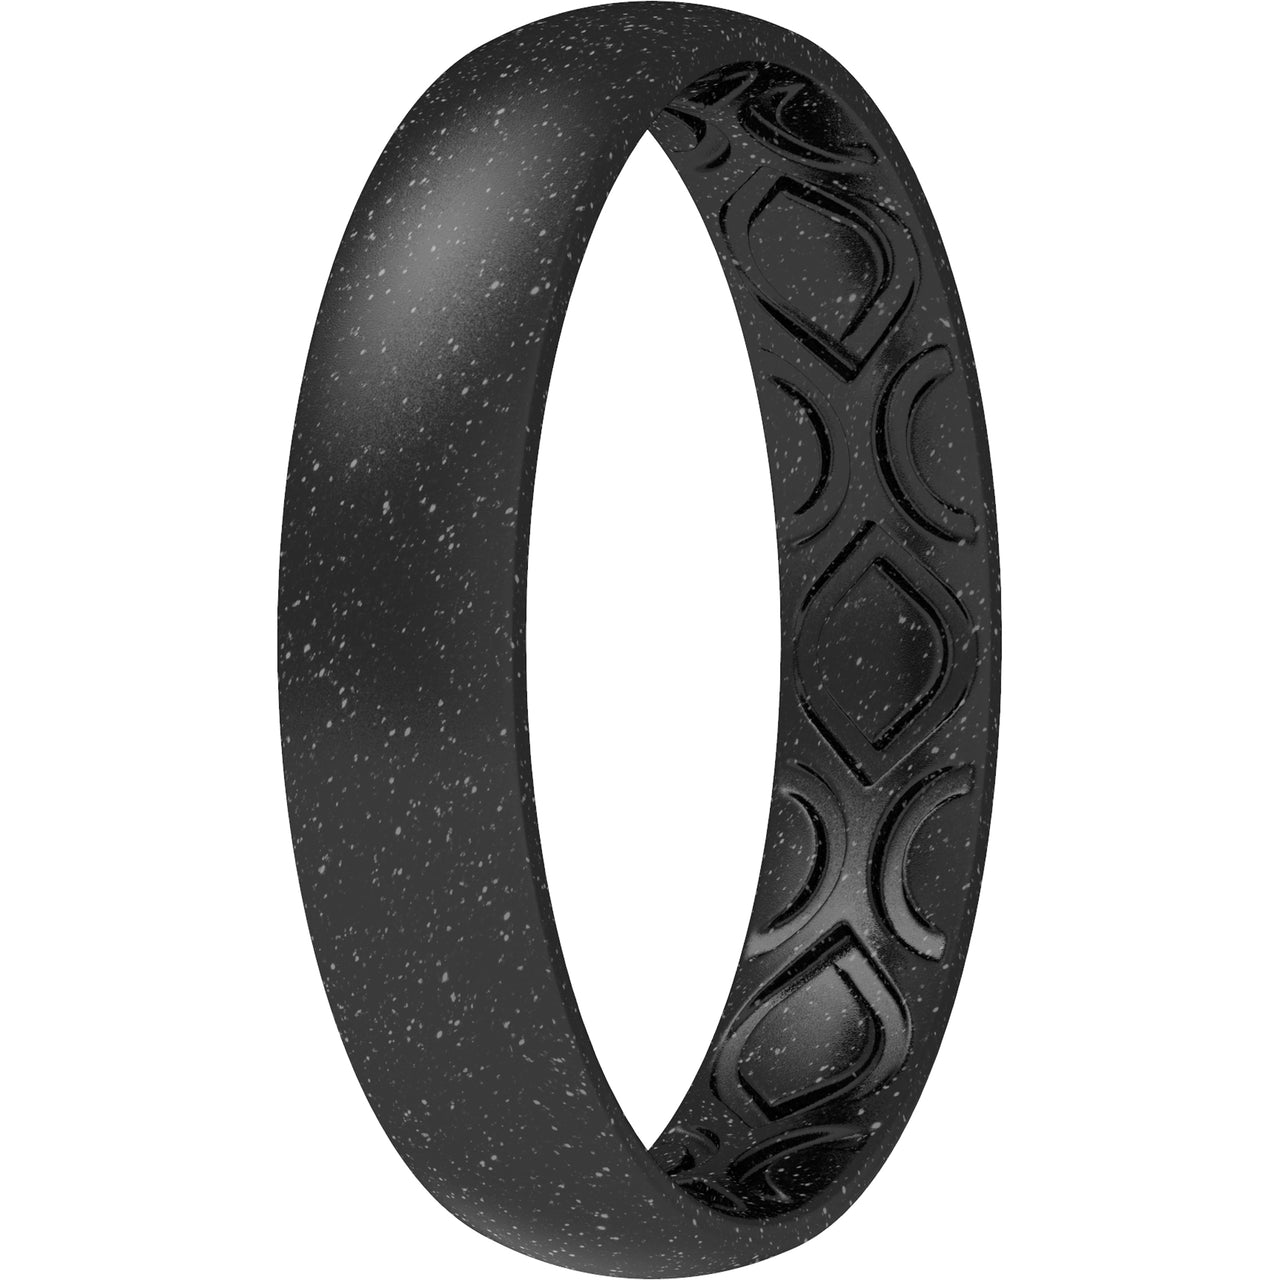 Breathable Women's Ring